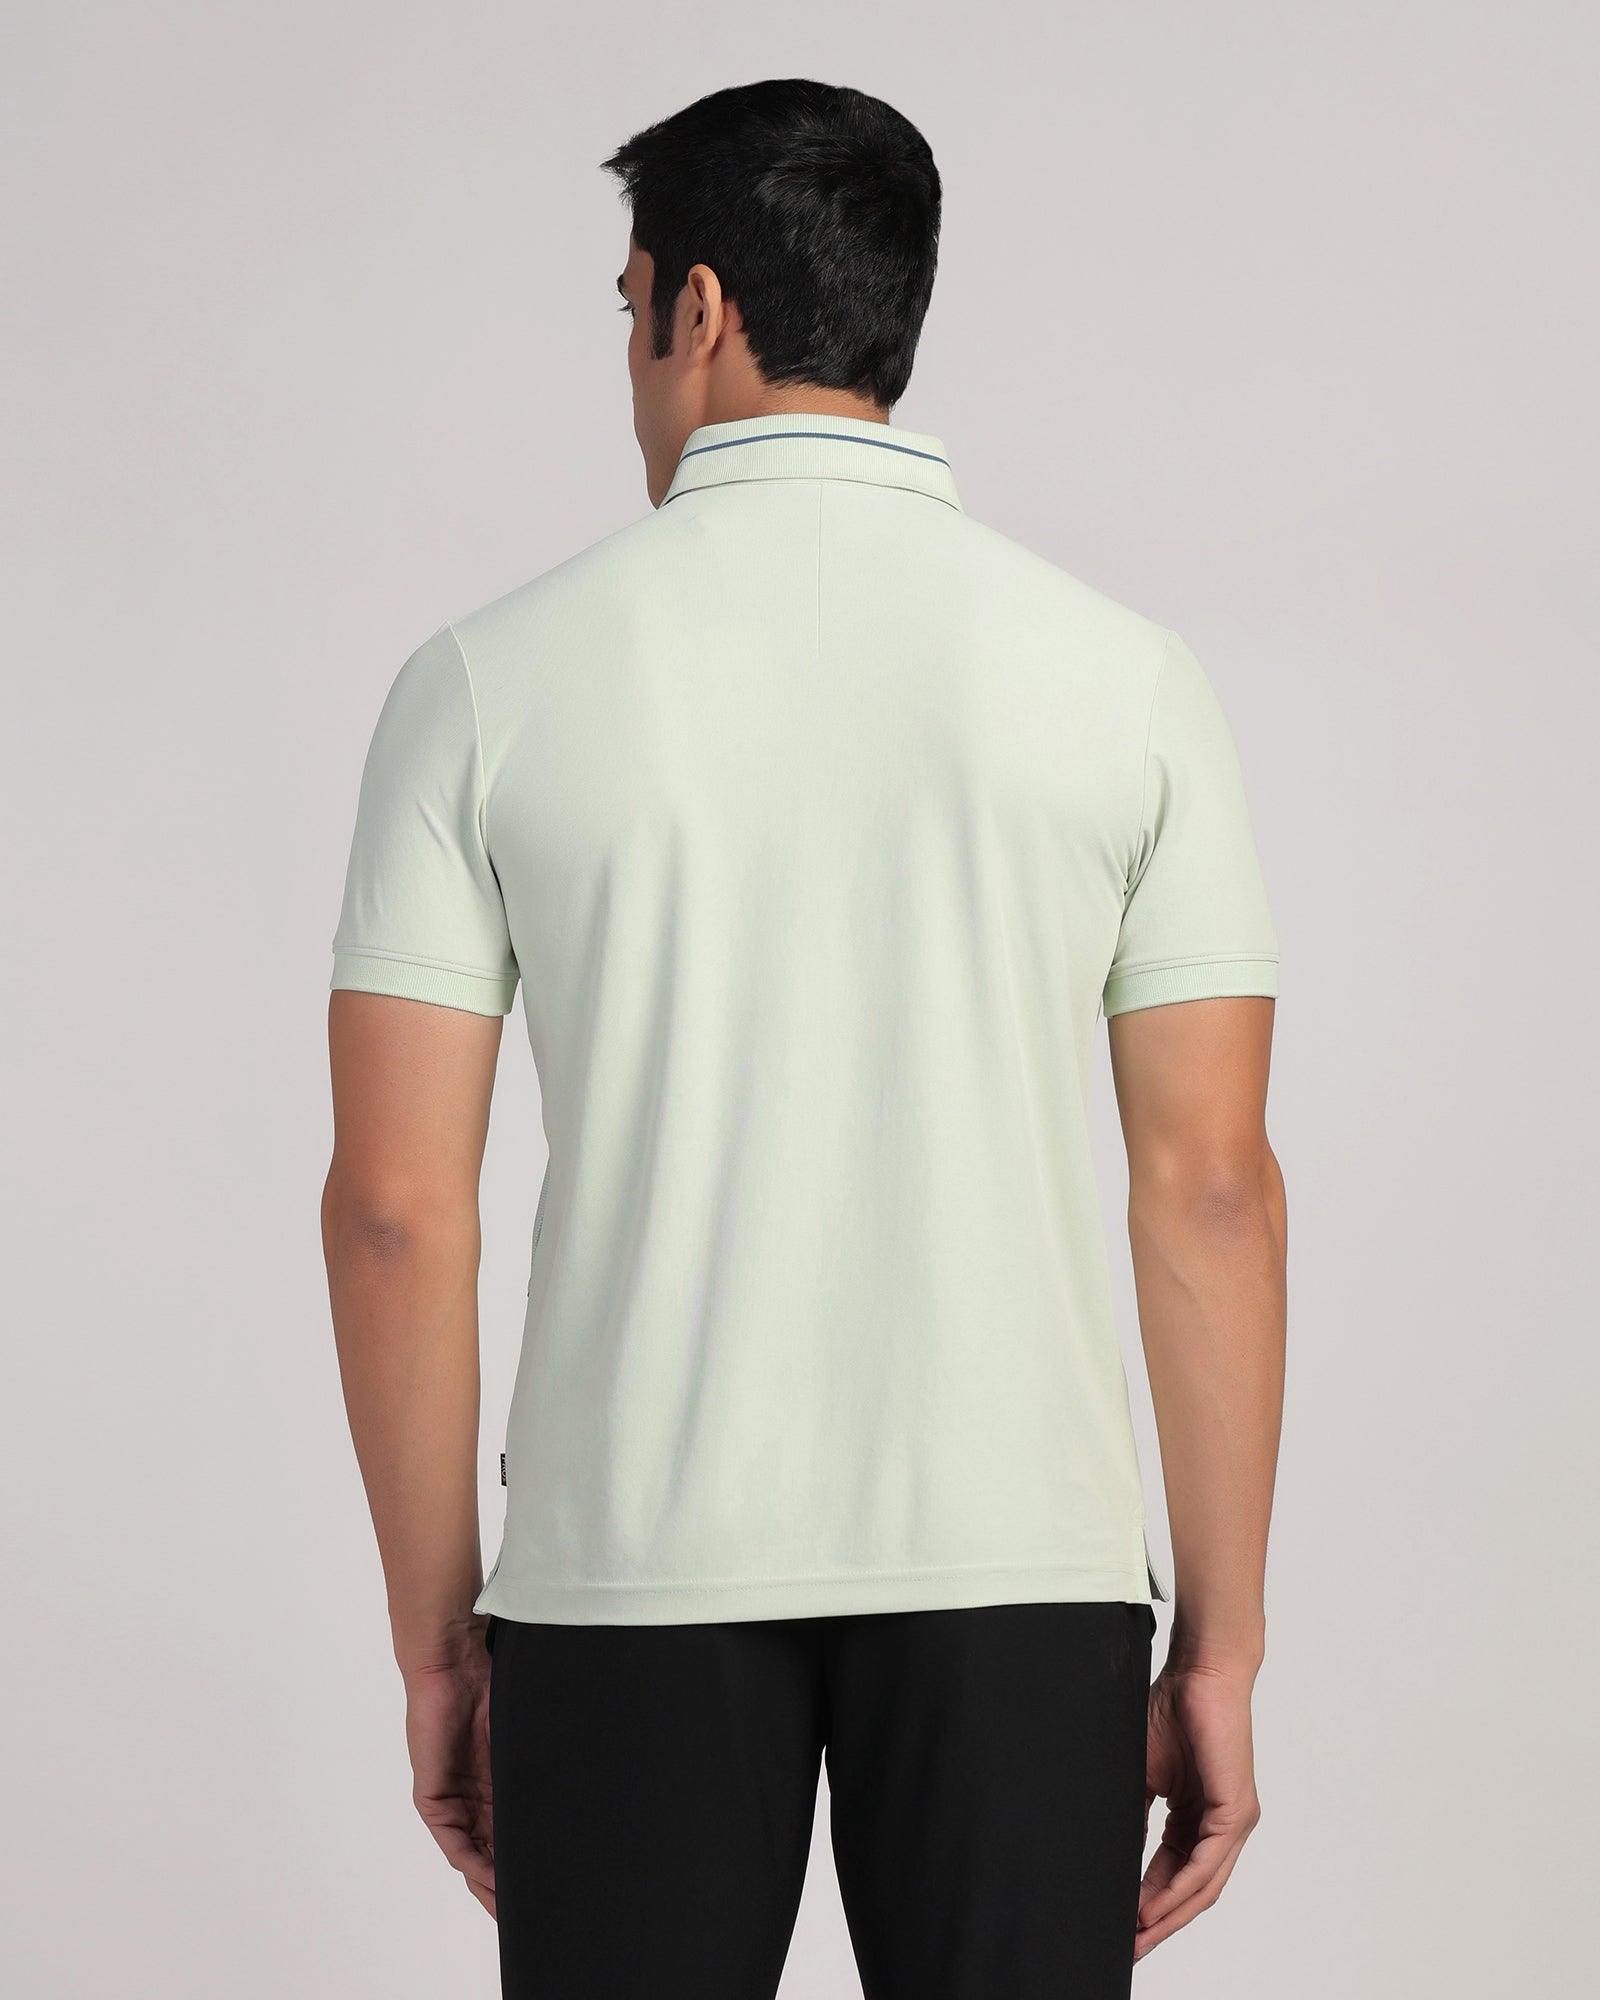 TechPro Polo Mint Solid T-Shirt - Weber